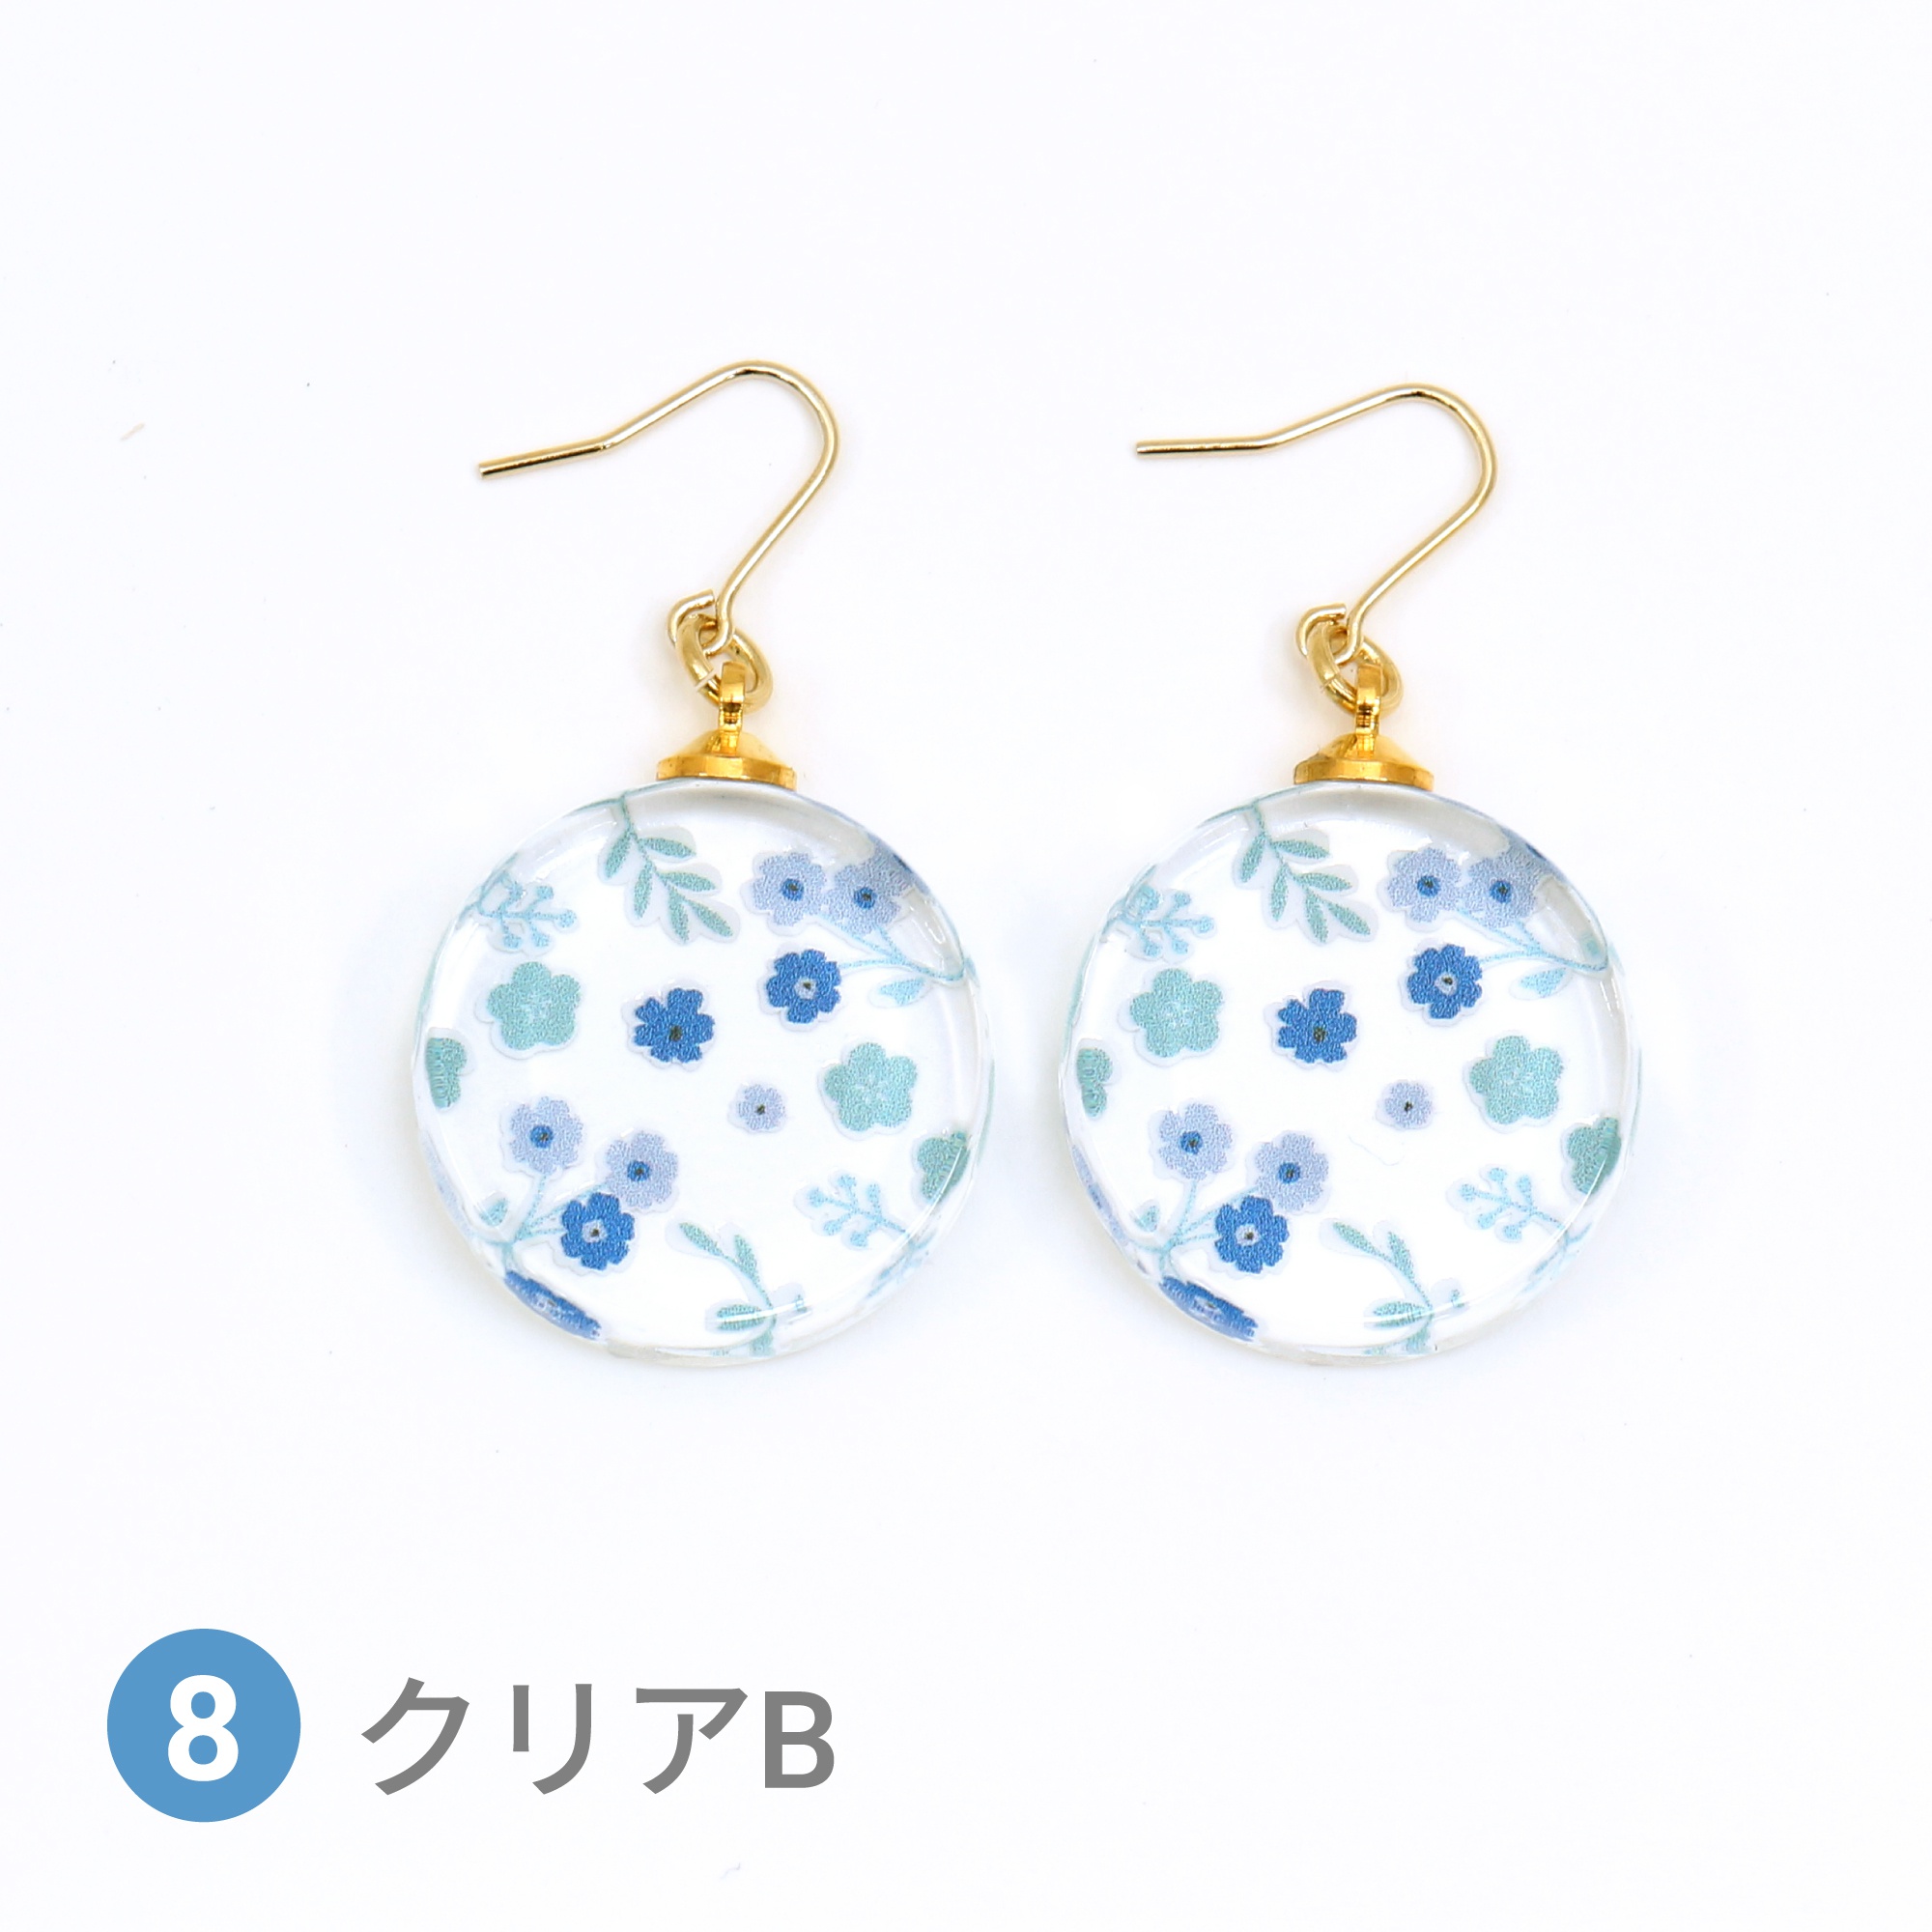 Glass accessories Pierced Earring FLORAL PATTERN clear B round shape